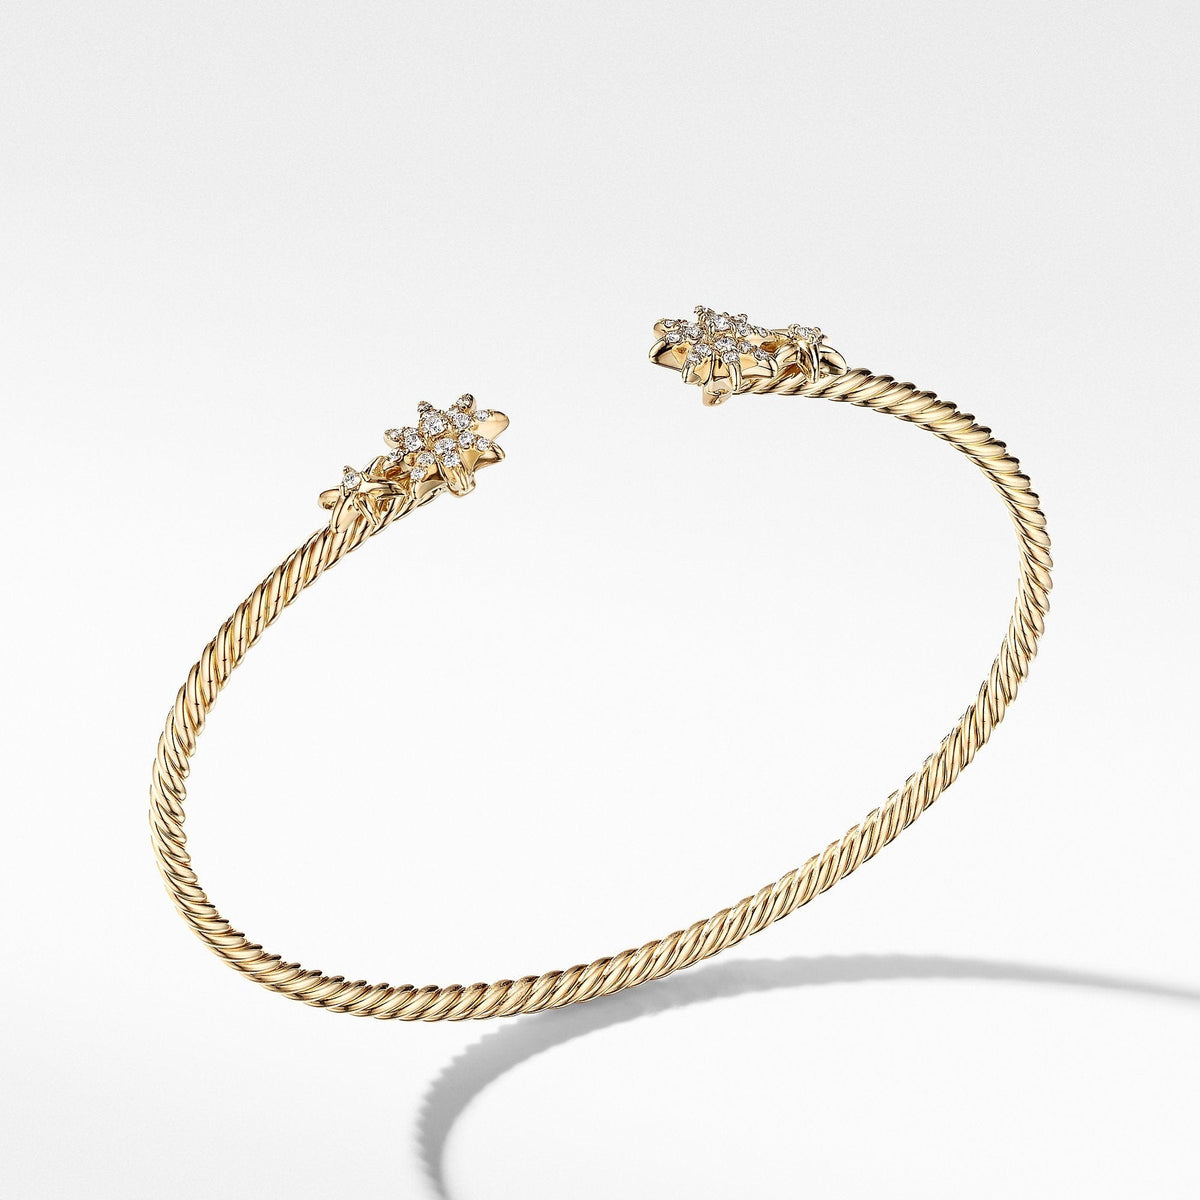 Petite Starburst Open Cable Bracelet in 18K Yellow Gold with Pavé Diamonds